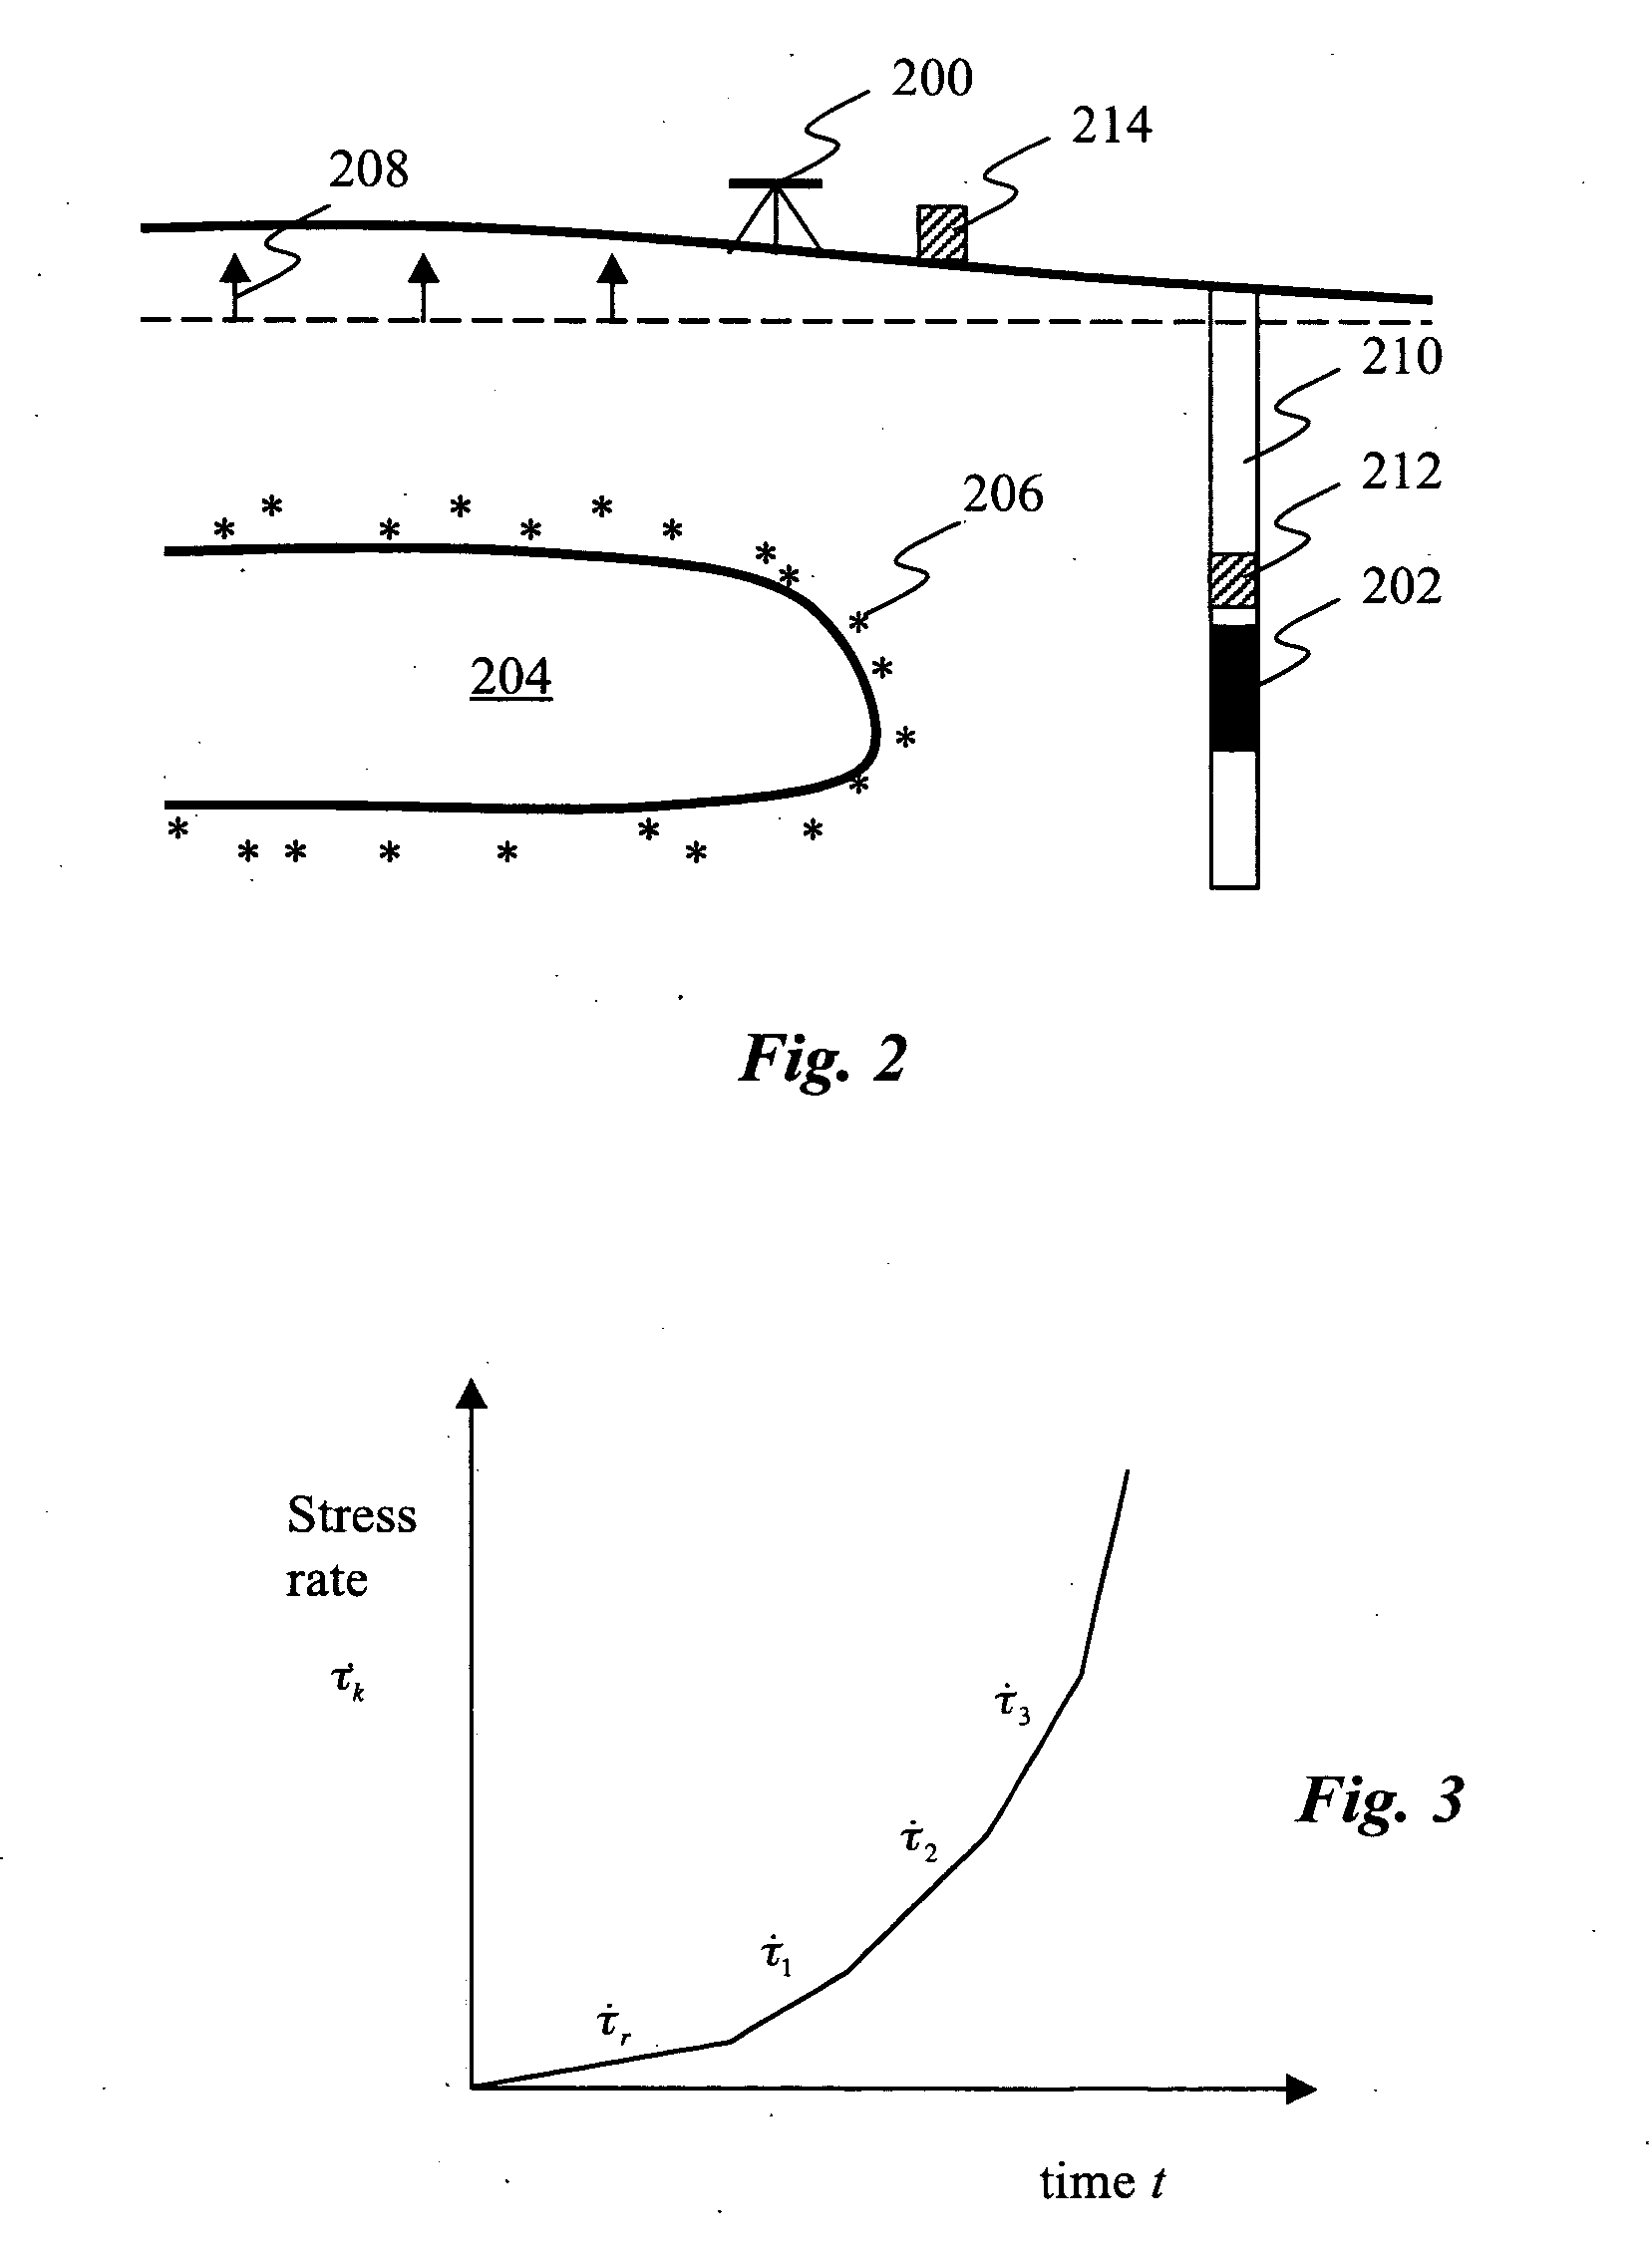 Apparatus and method for hydraulic fracture imaging by joint inversion of deformation and seismicity